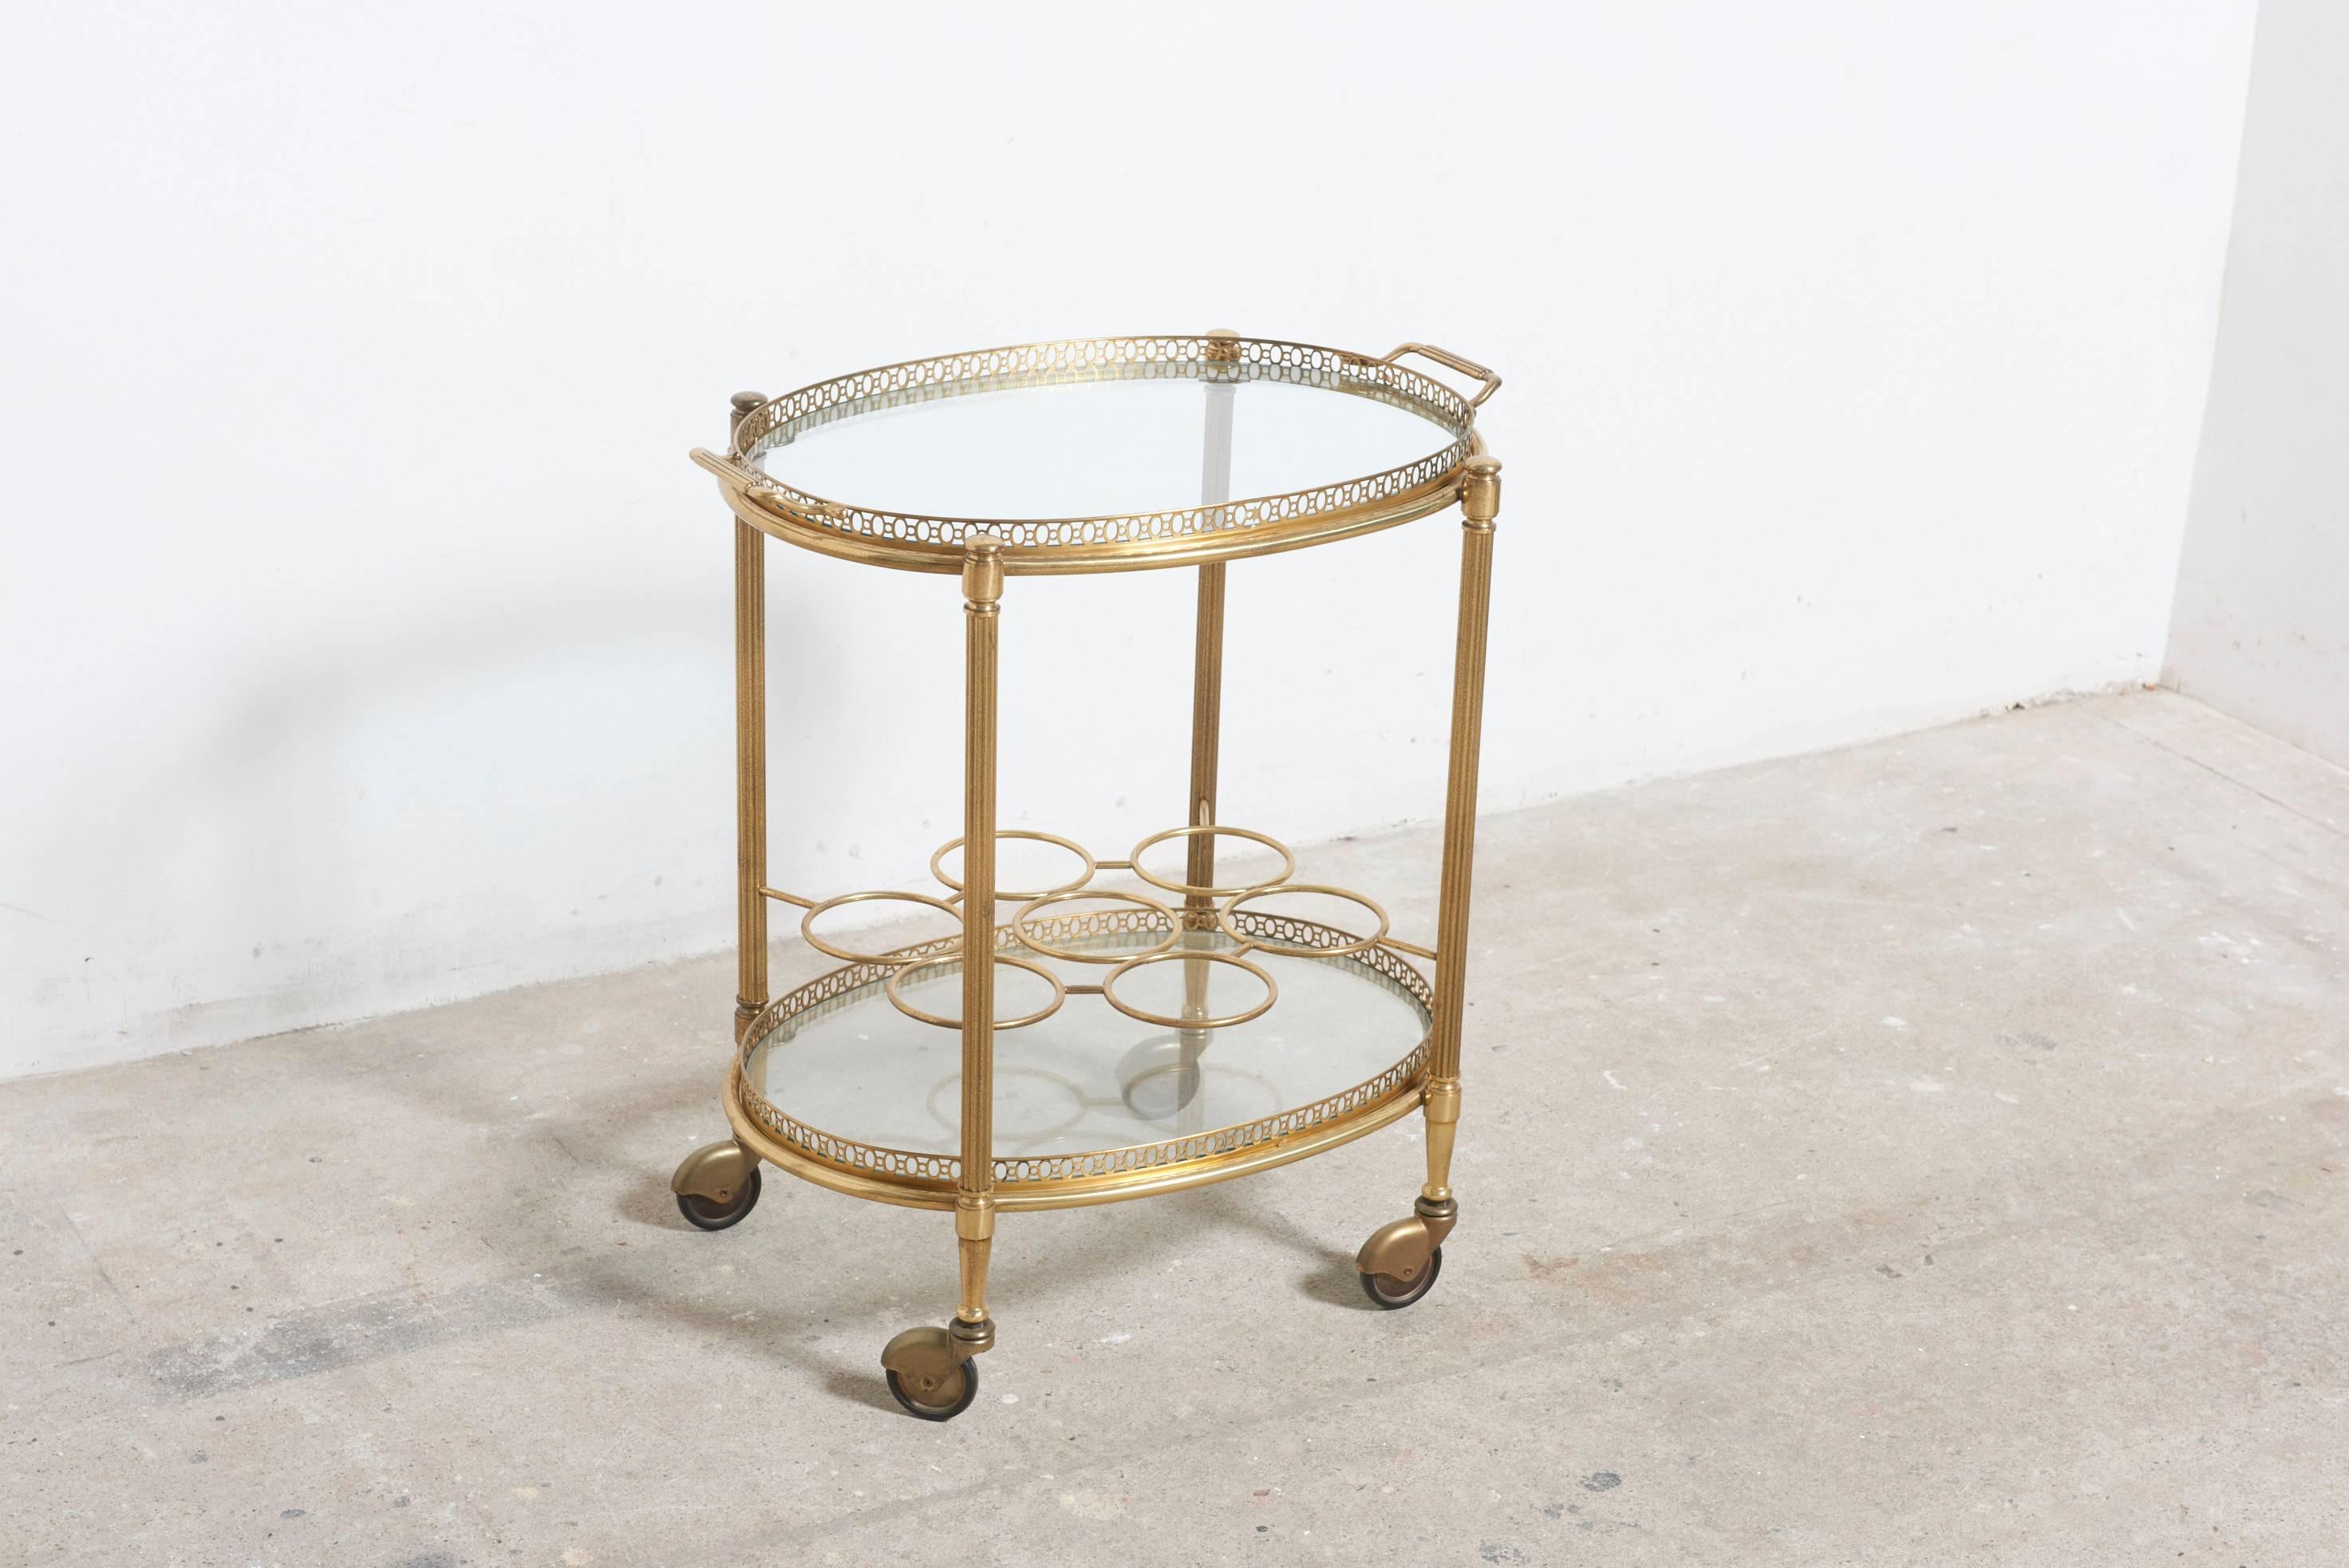 This very fine designed two-glass tiered oval polished brass bar and serving cart is simple and elegant, with a serving tray and two brass handles to push, a bottle rack for seven wine bottles, on rolling caster wheels.
Perfect for use as a side or